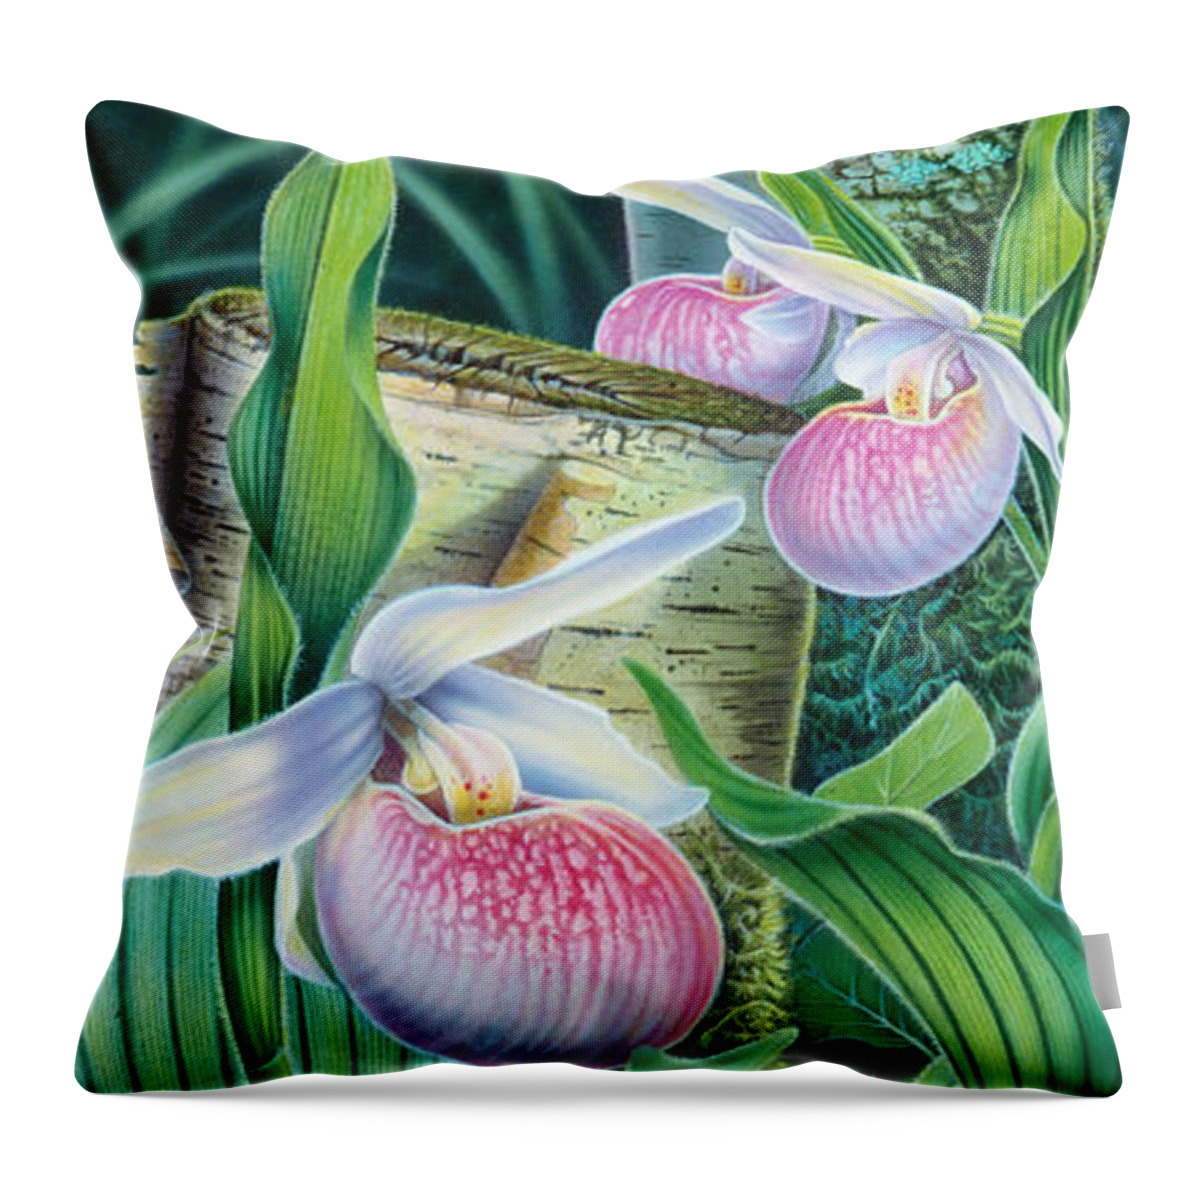 Jon Q Wright Throw Pillow featuring the painting Lady Slipper by JQ Licensing